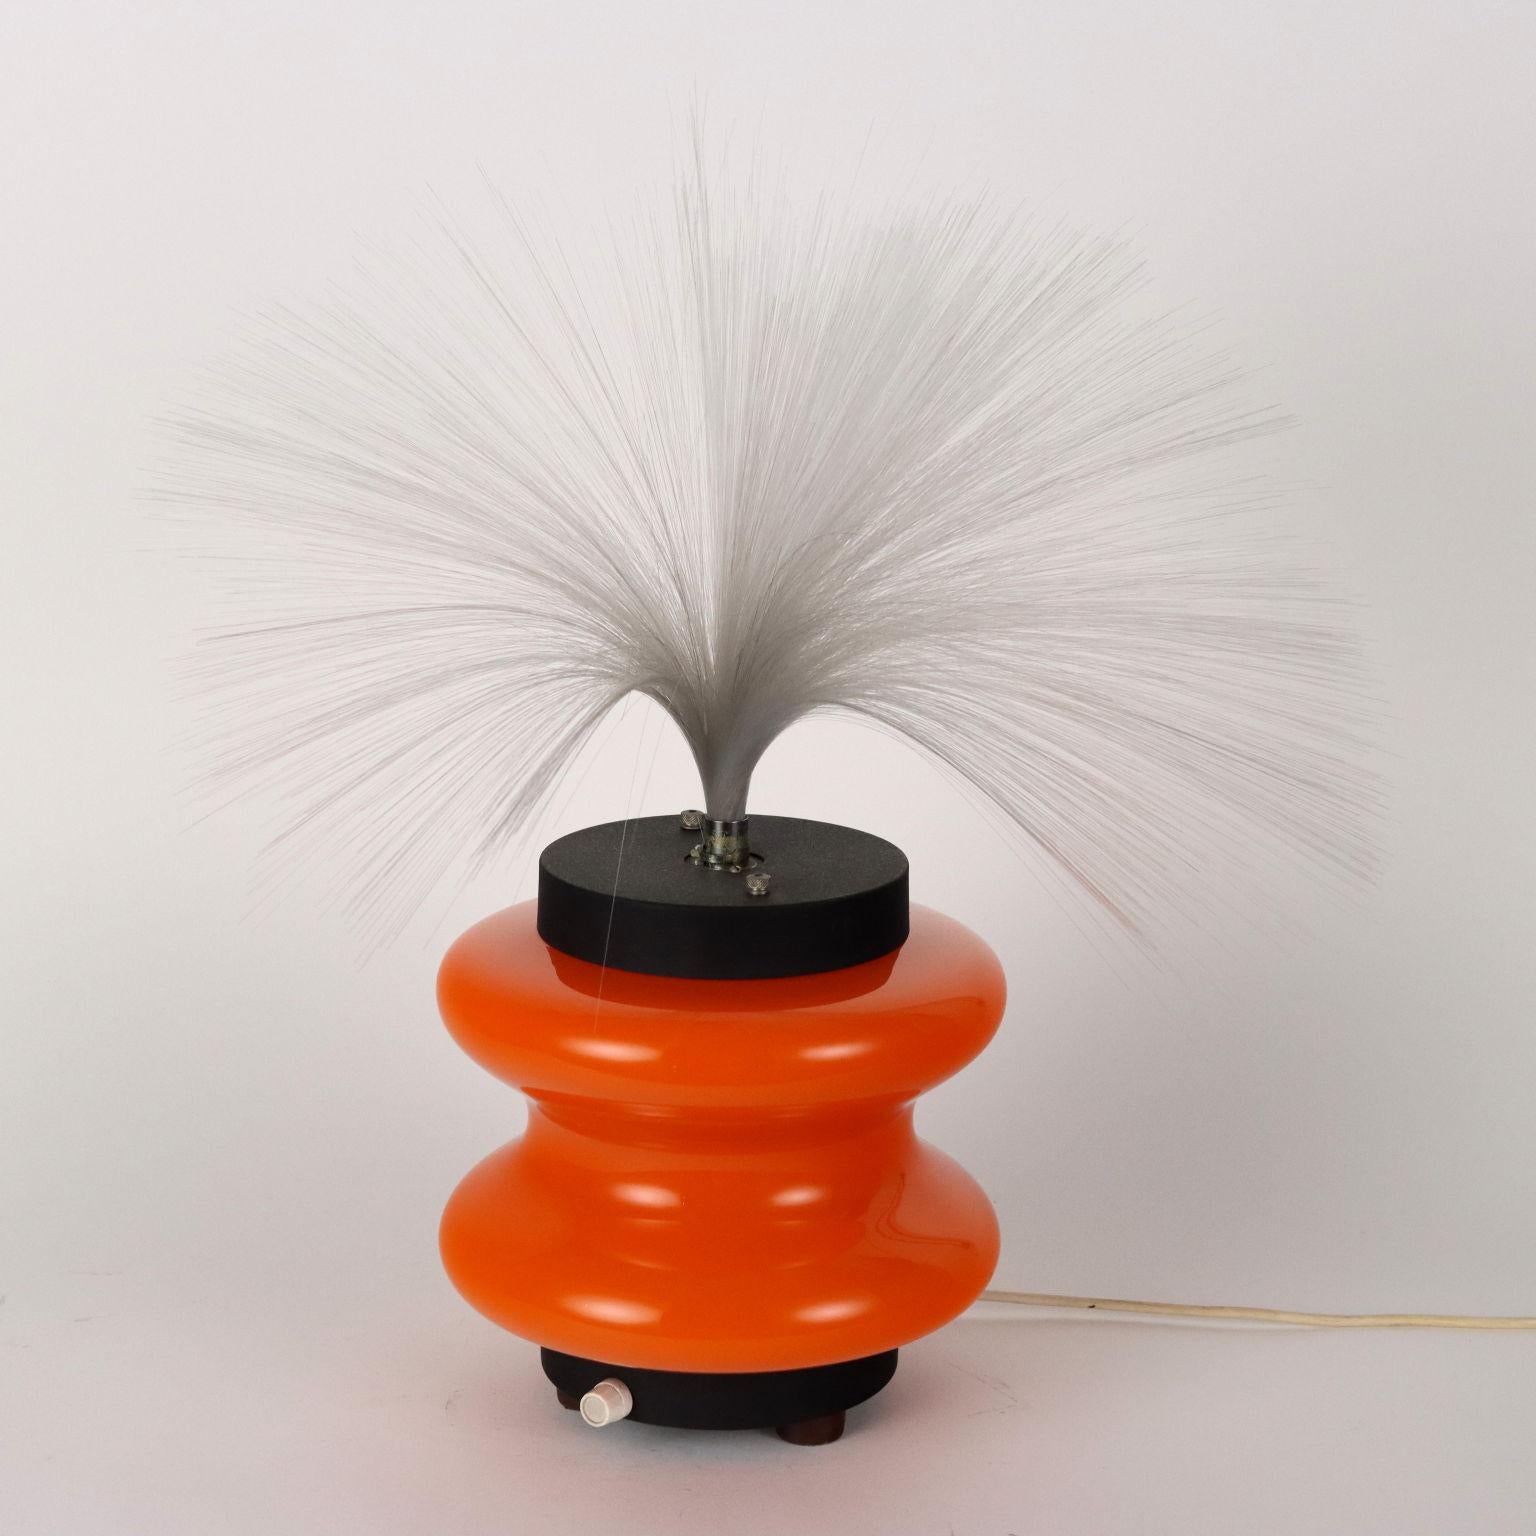 Italian Lamp with Optical Fibers from the 70s